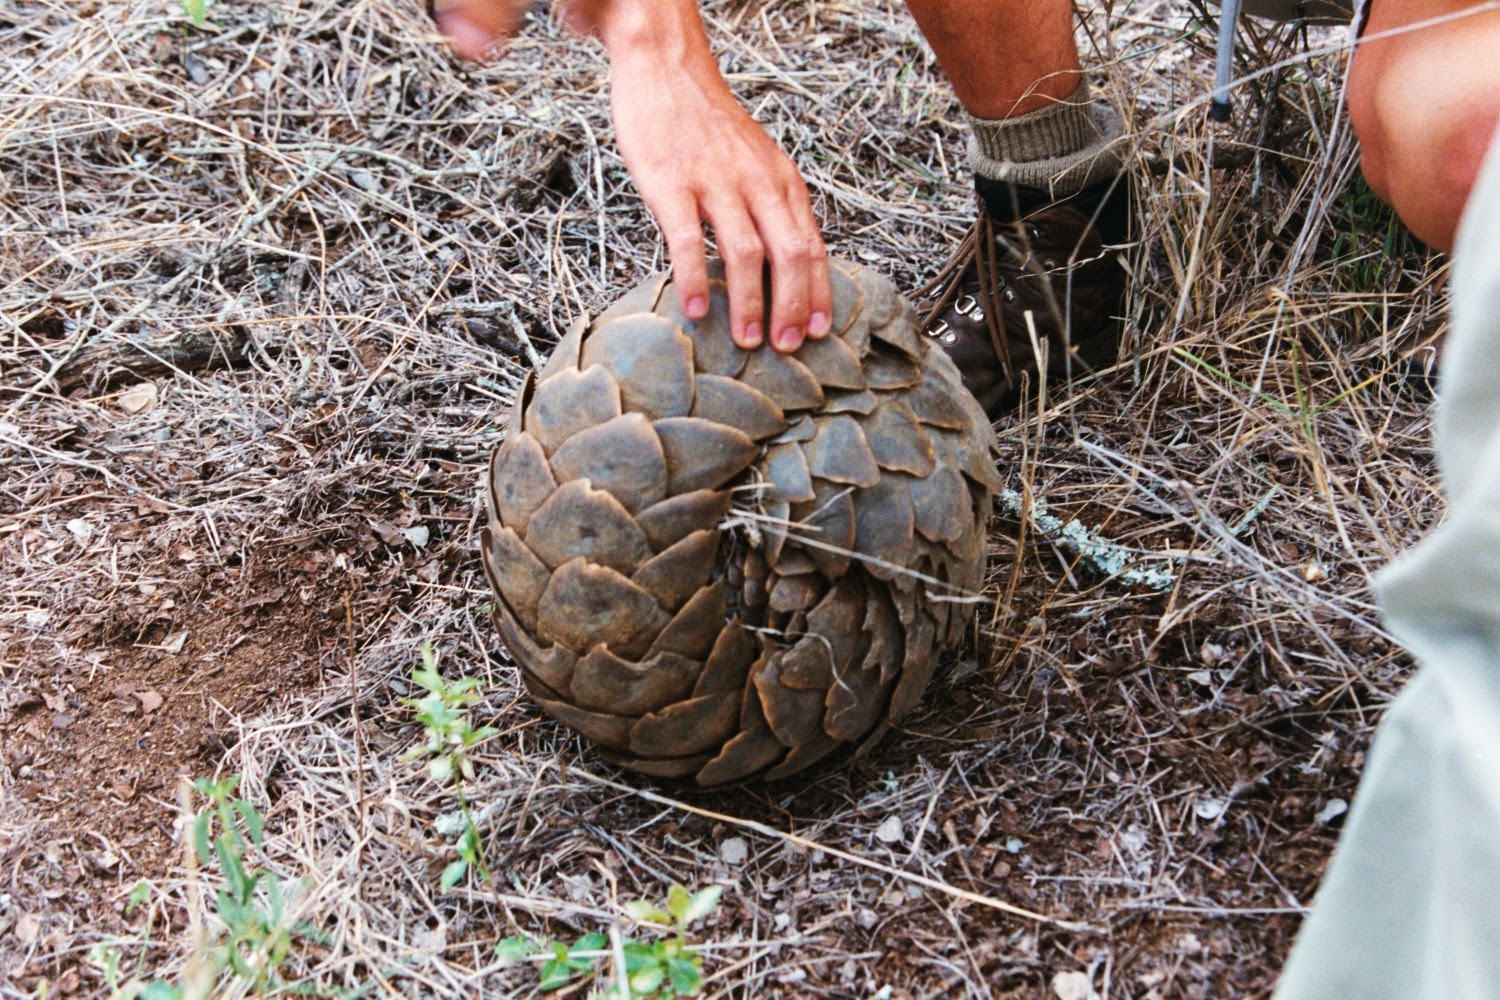 Murder is Everywhere: The Day I Met a Pangolin1500 x 1000